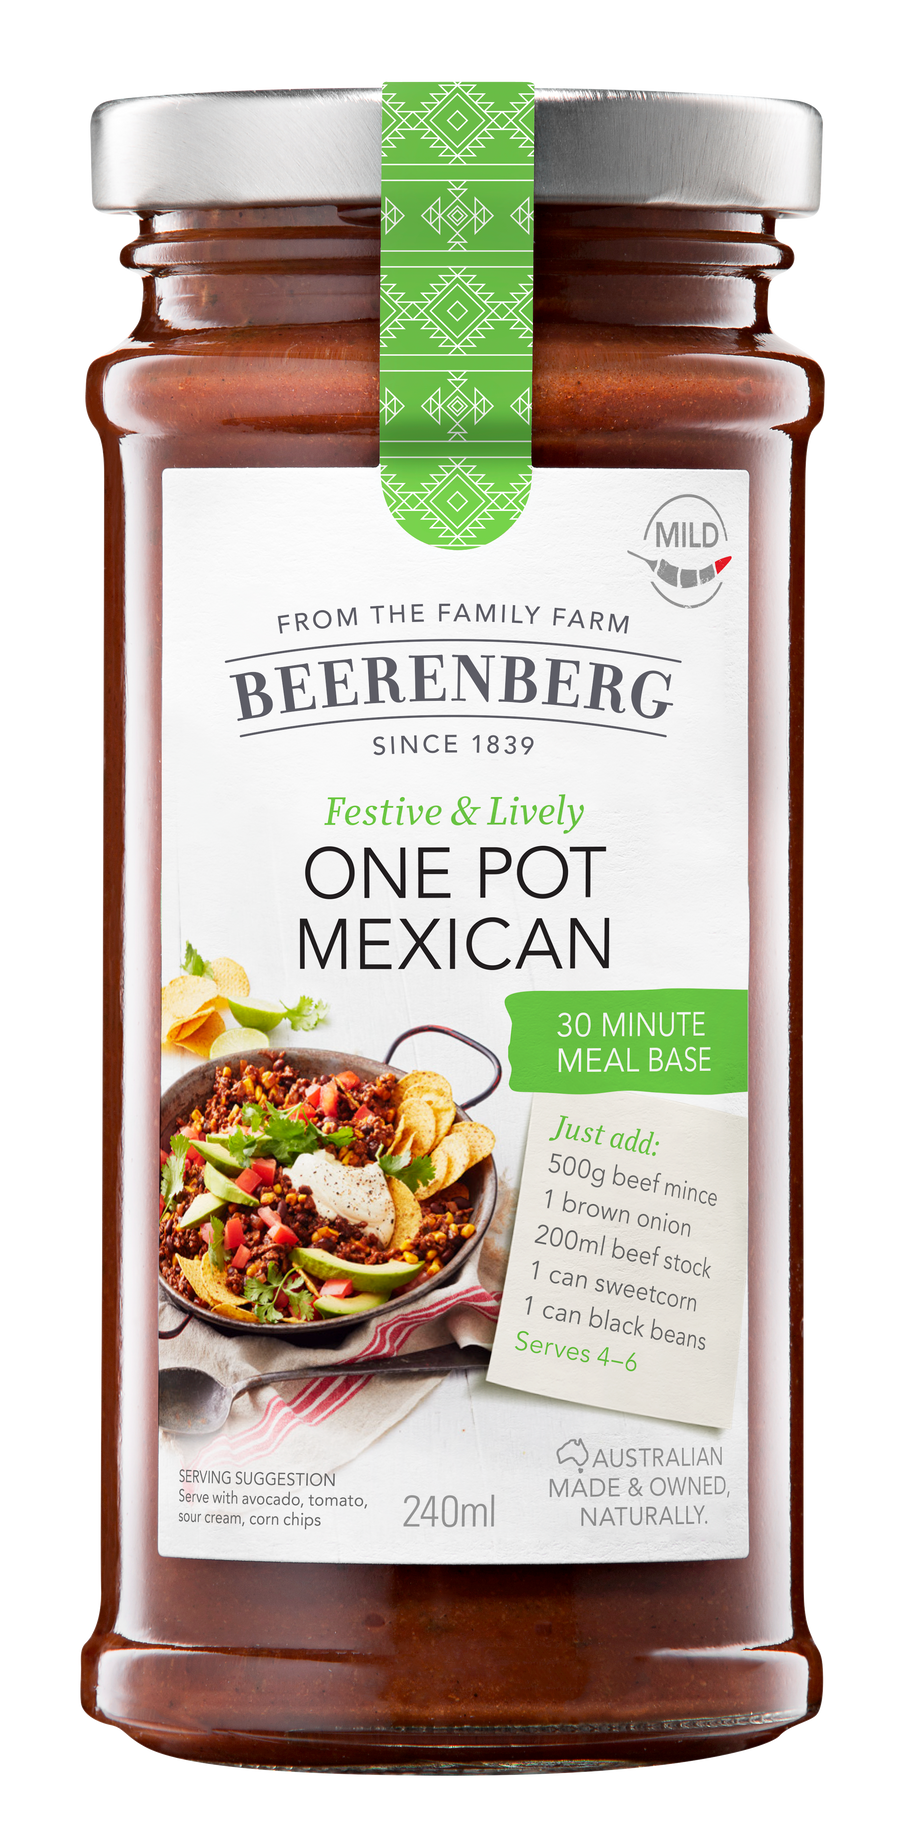 One Pot Mexican 30 Minute Meal Base